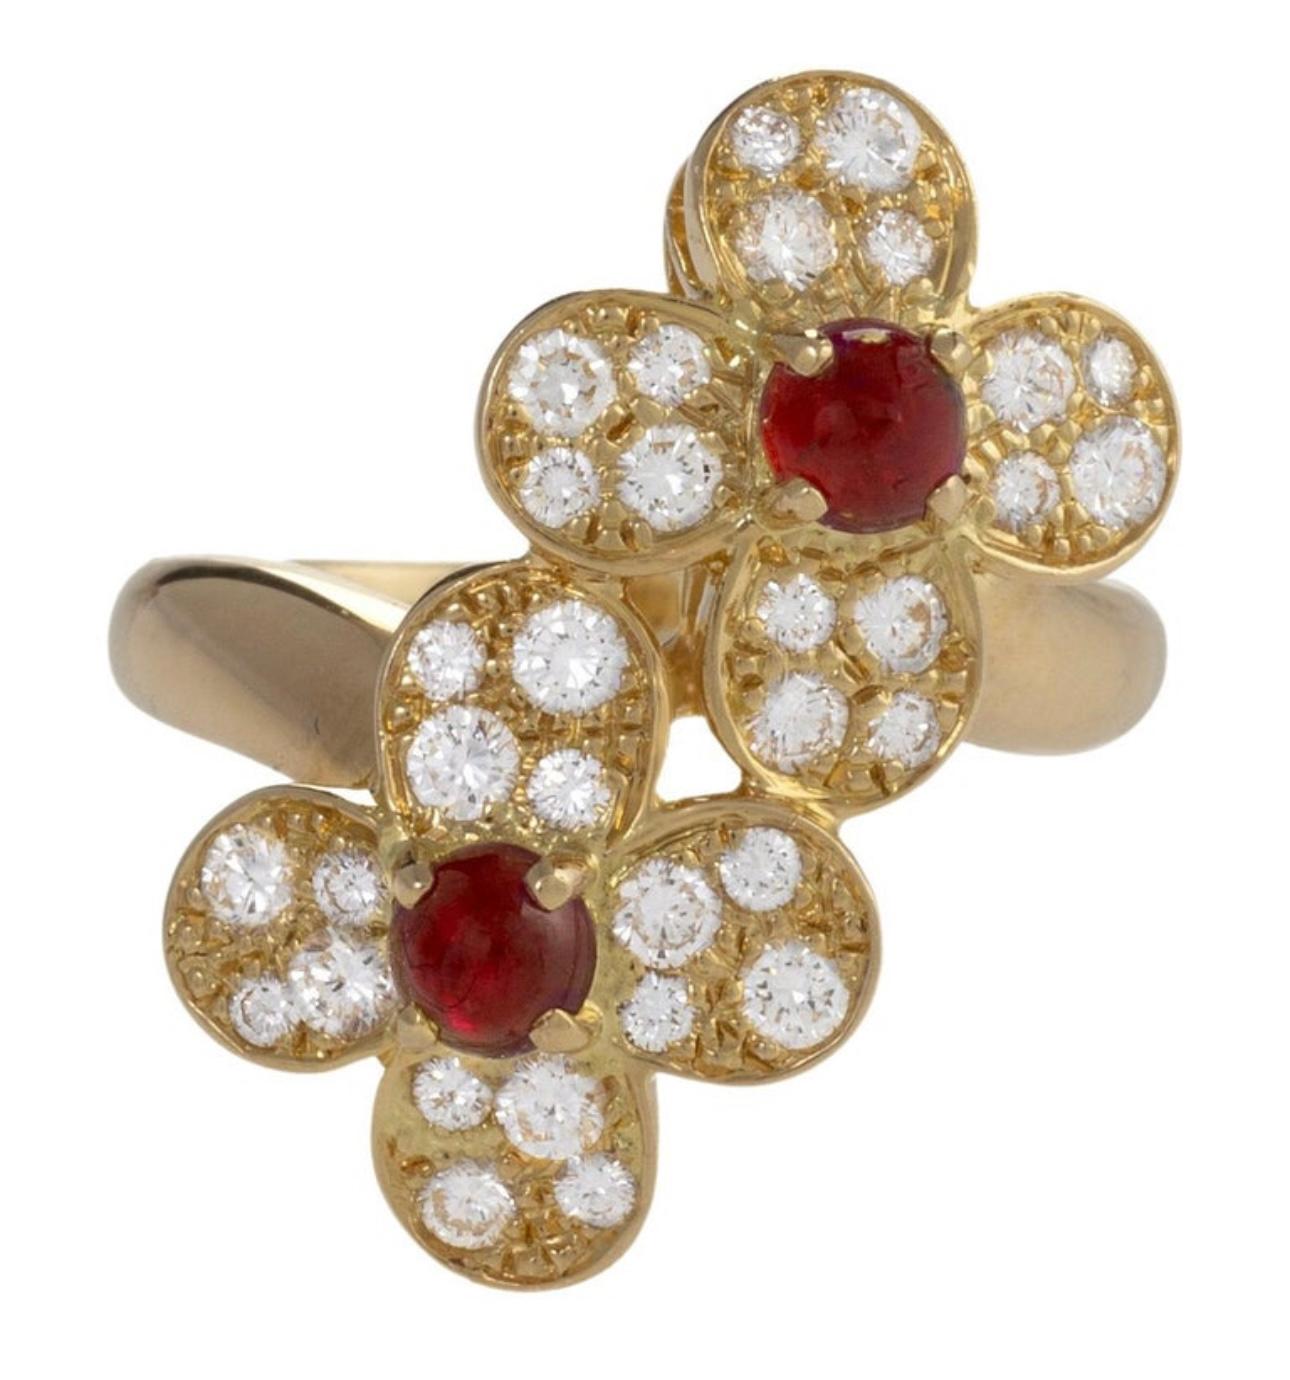 Van Cleef & Arpels Contemporary Ruby and Diamond “Trefle” Ring, 18KY Gold Size 6 In Excellent Condition For Sale In New York, NY